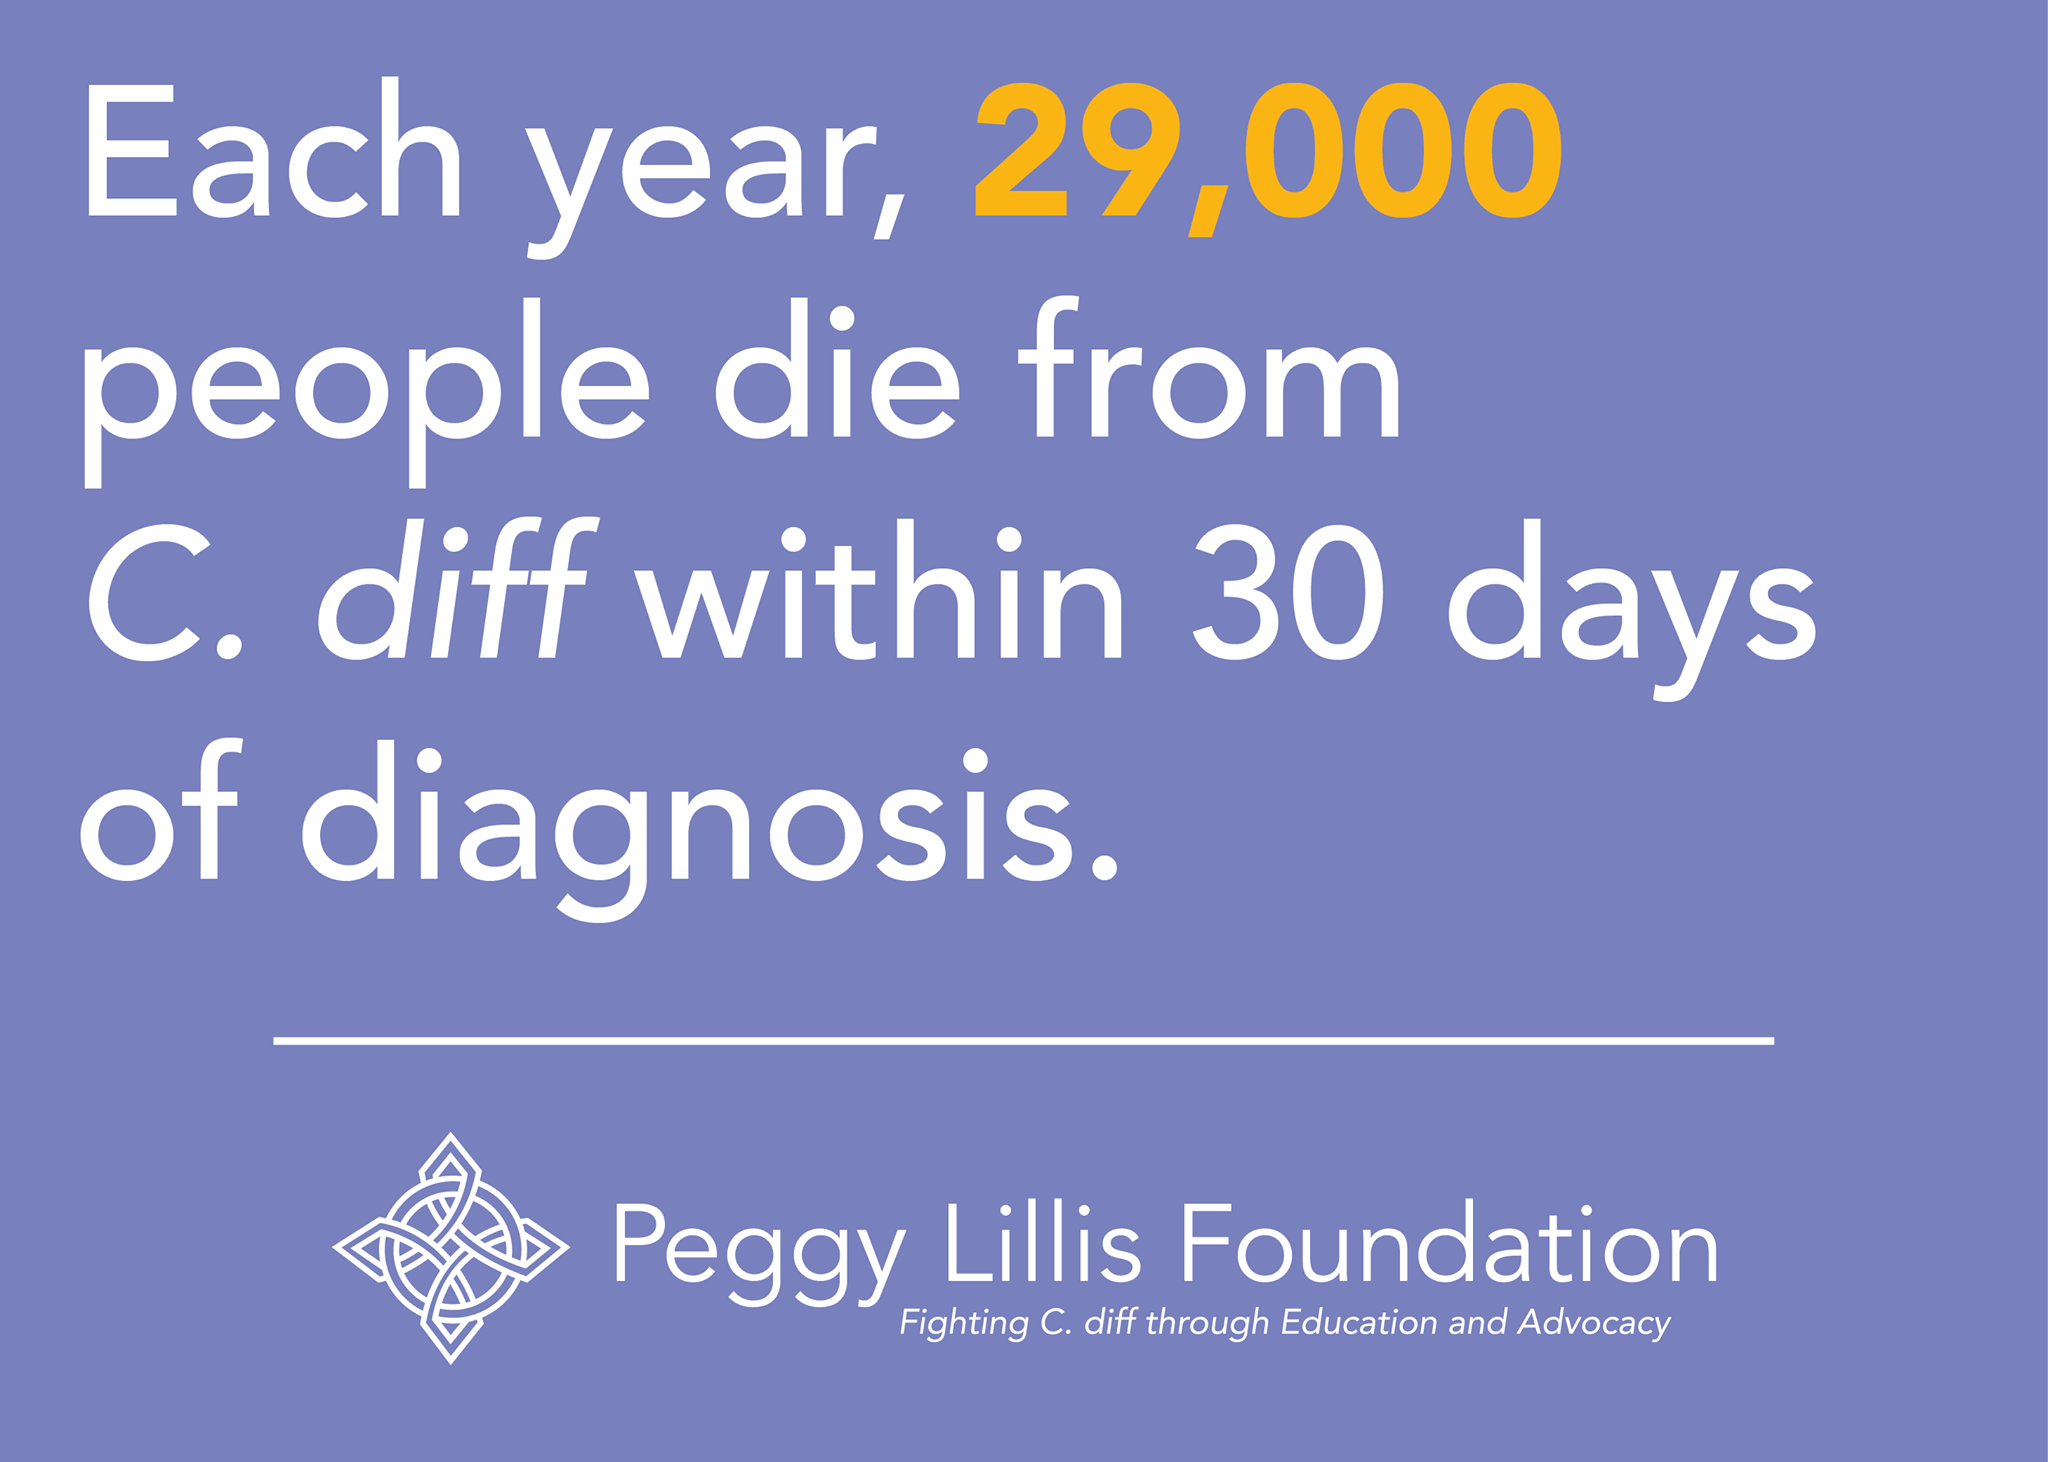 C. diff statistic by Peggy Lillis Foundation